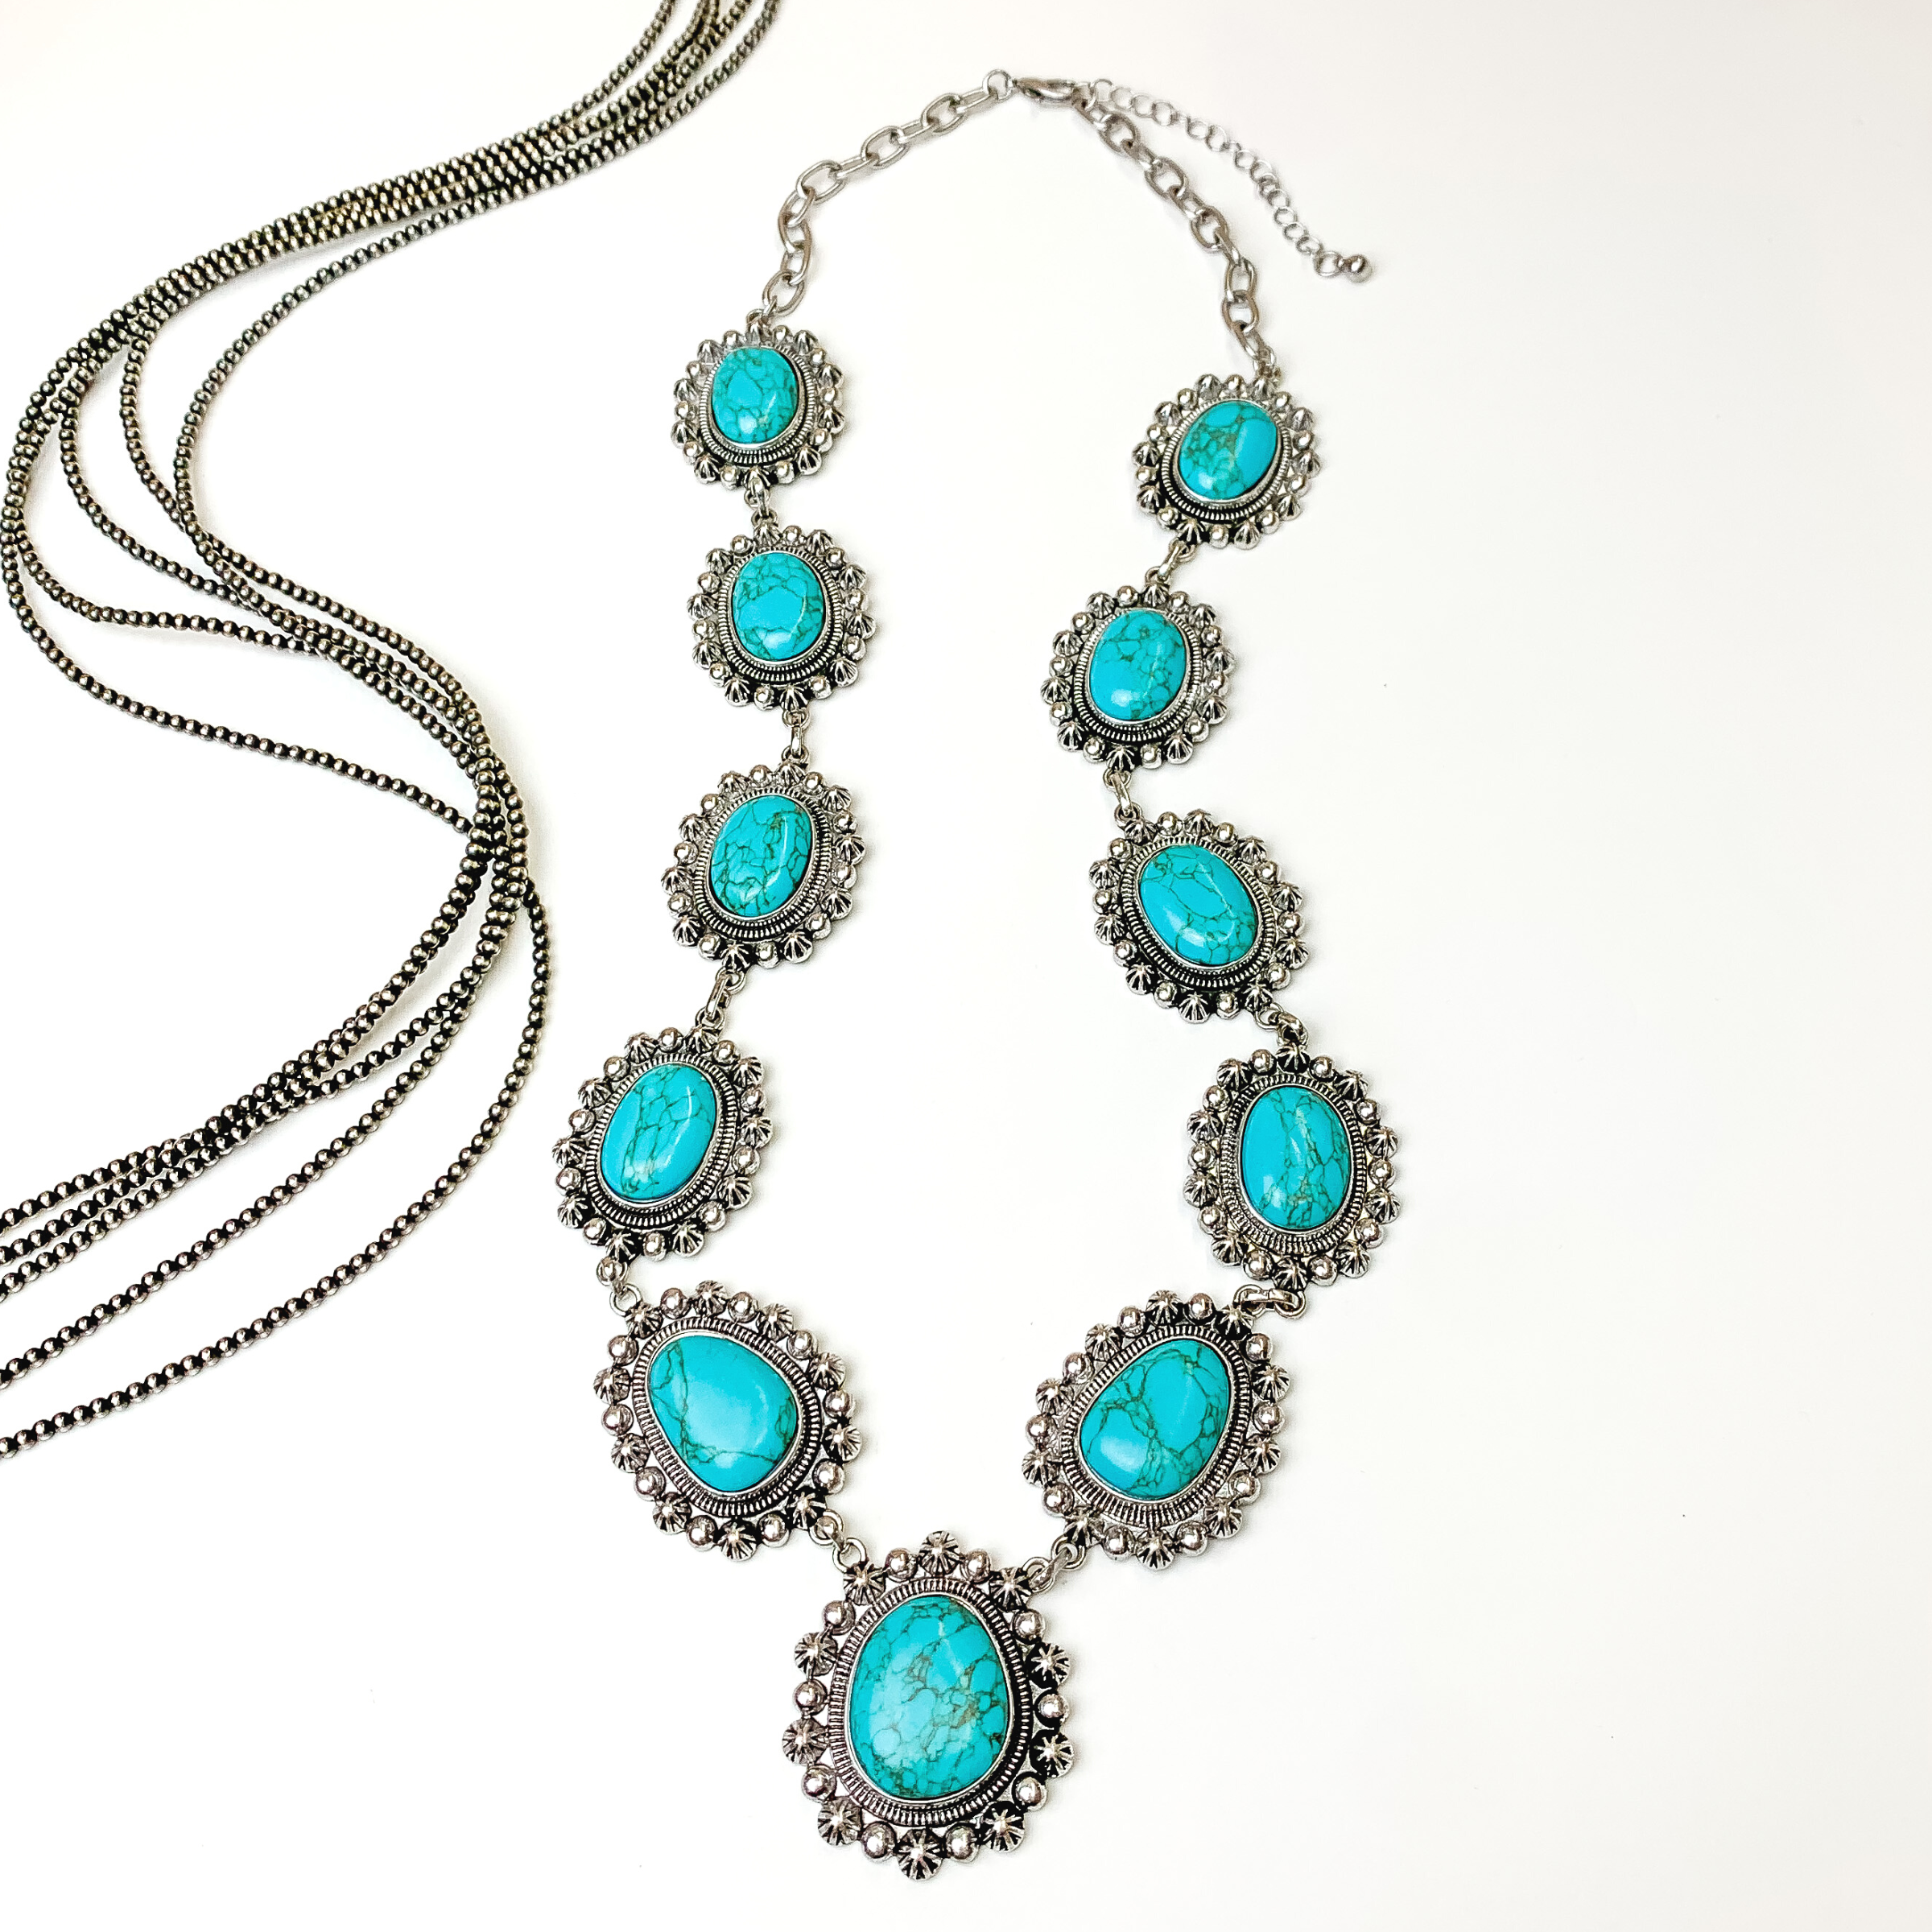 Main Focus Faux Navajo Necklace with Turquoise Stones - Giddy Up Glamour Boutique